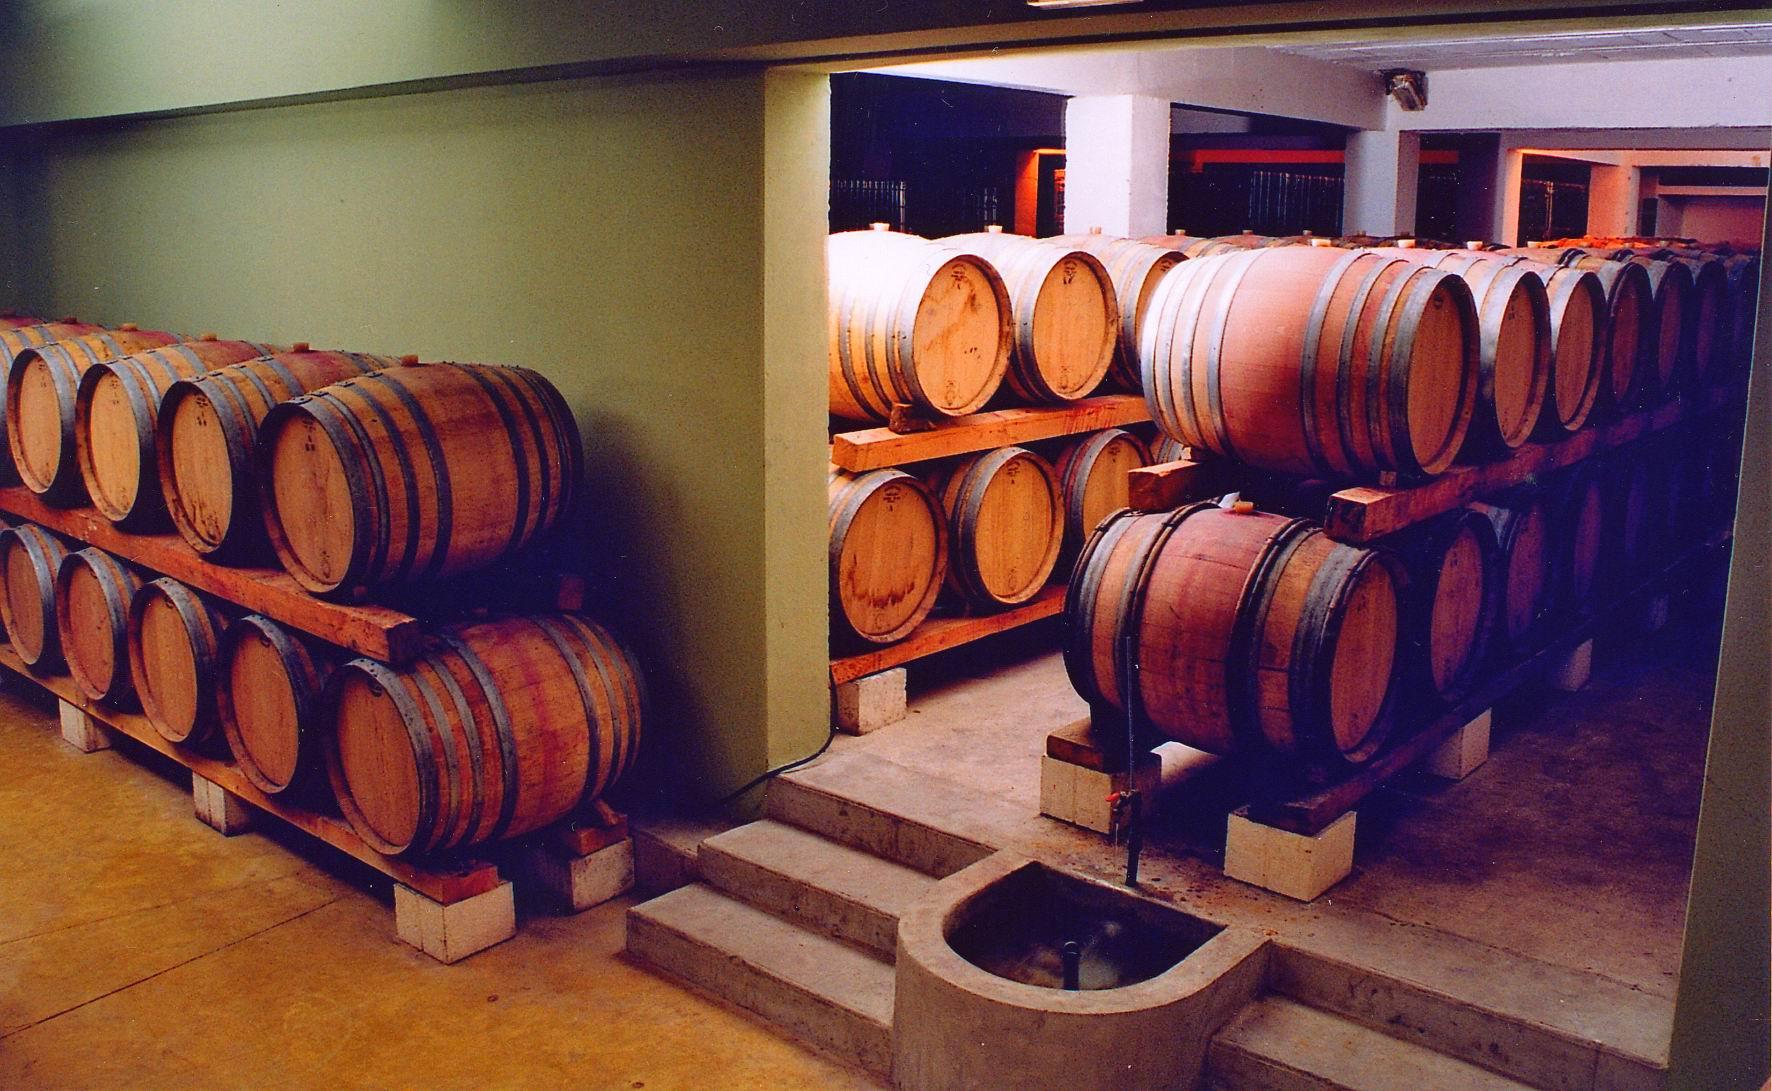 A vinification in wood